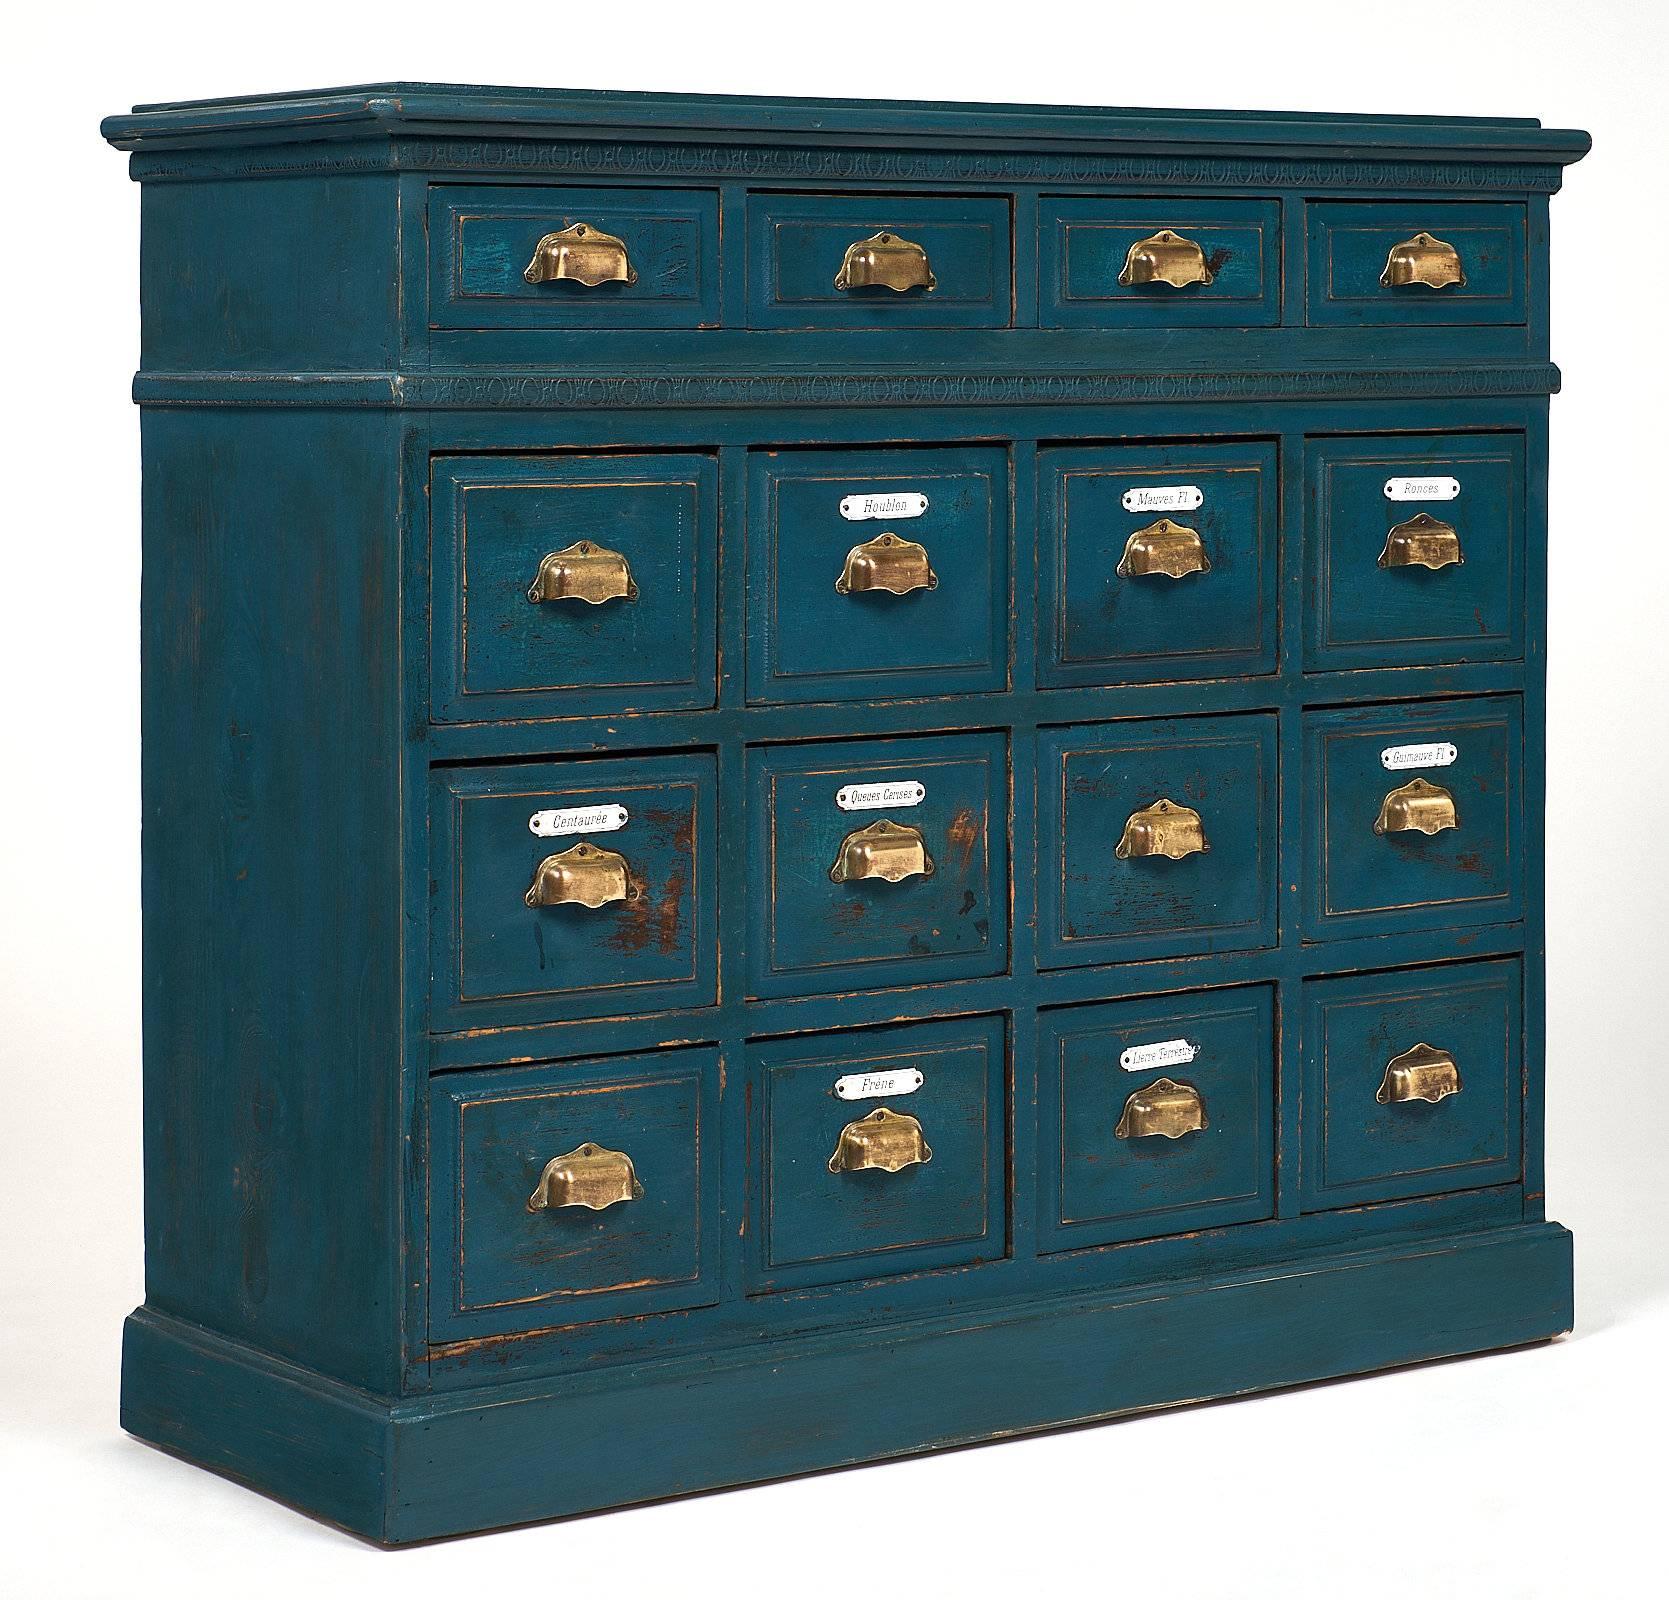 Napoleon III Teal Antique Apothecary Cabinet